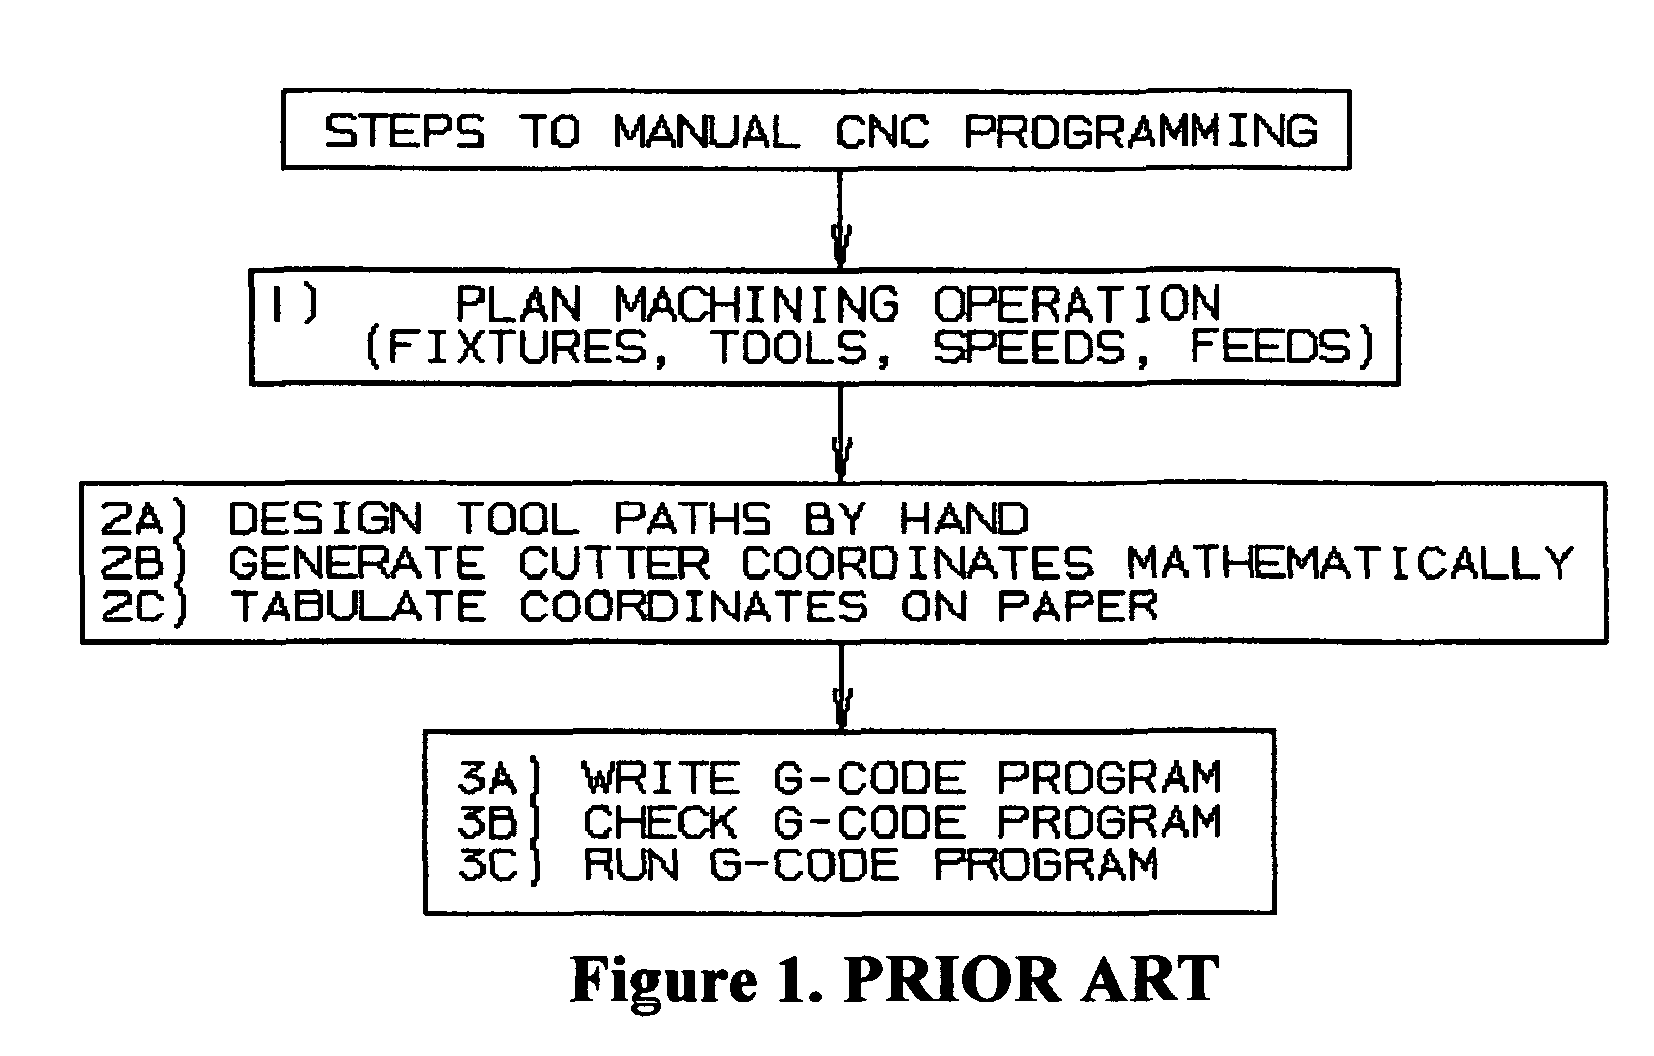 Methods and systems for producing numerical control program files for controlling machine tools